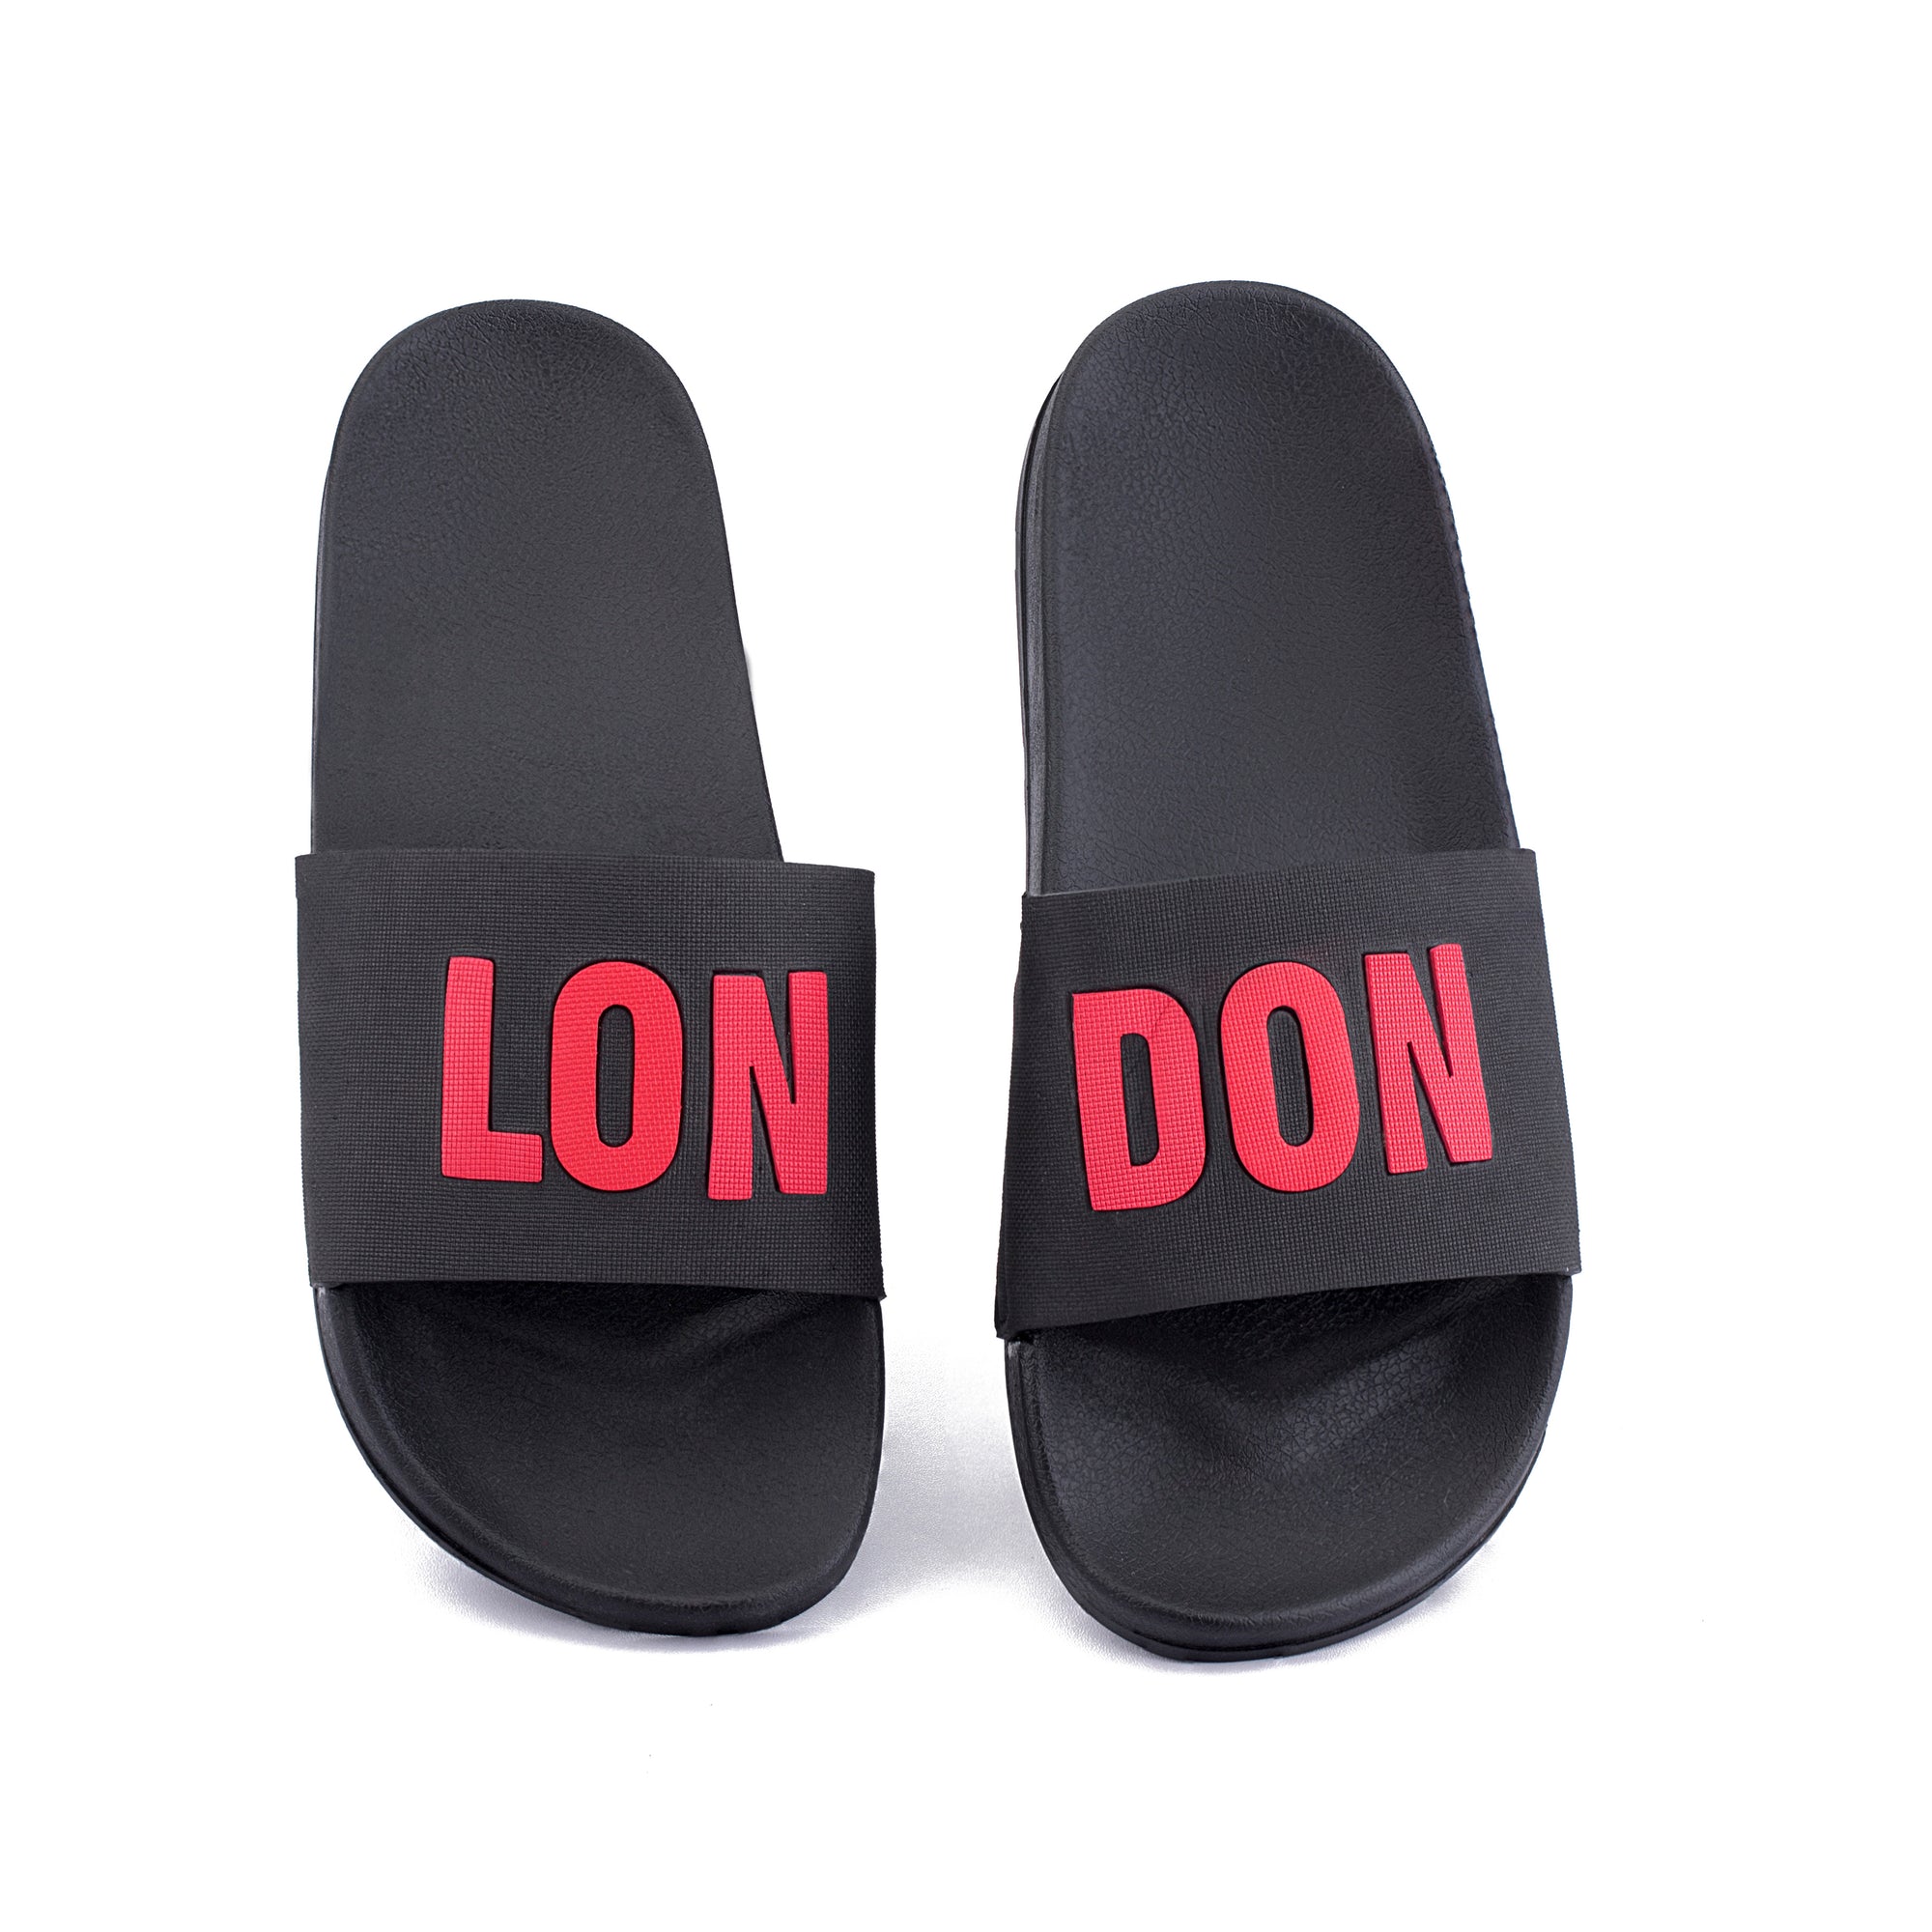 Relax London Sliders - Red